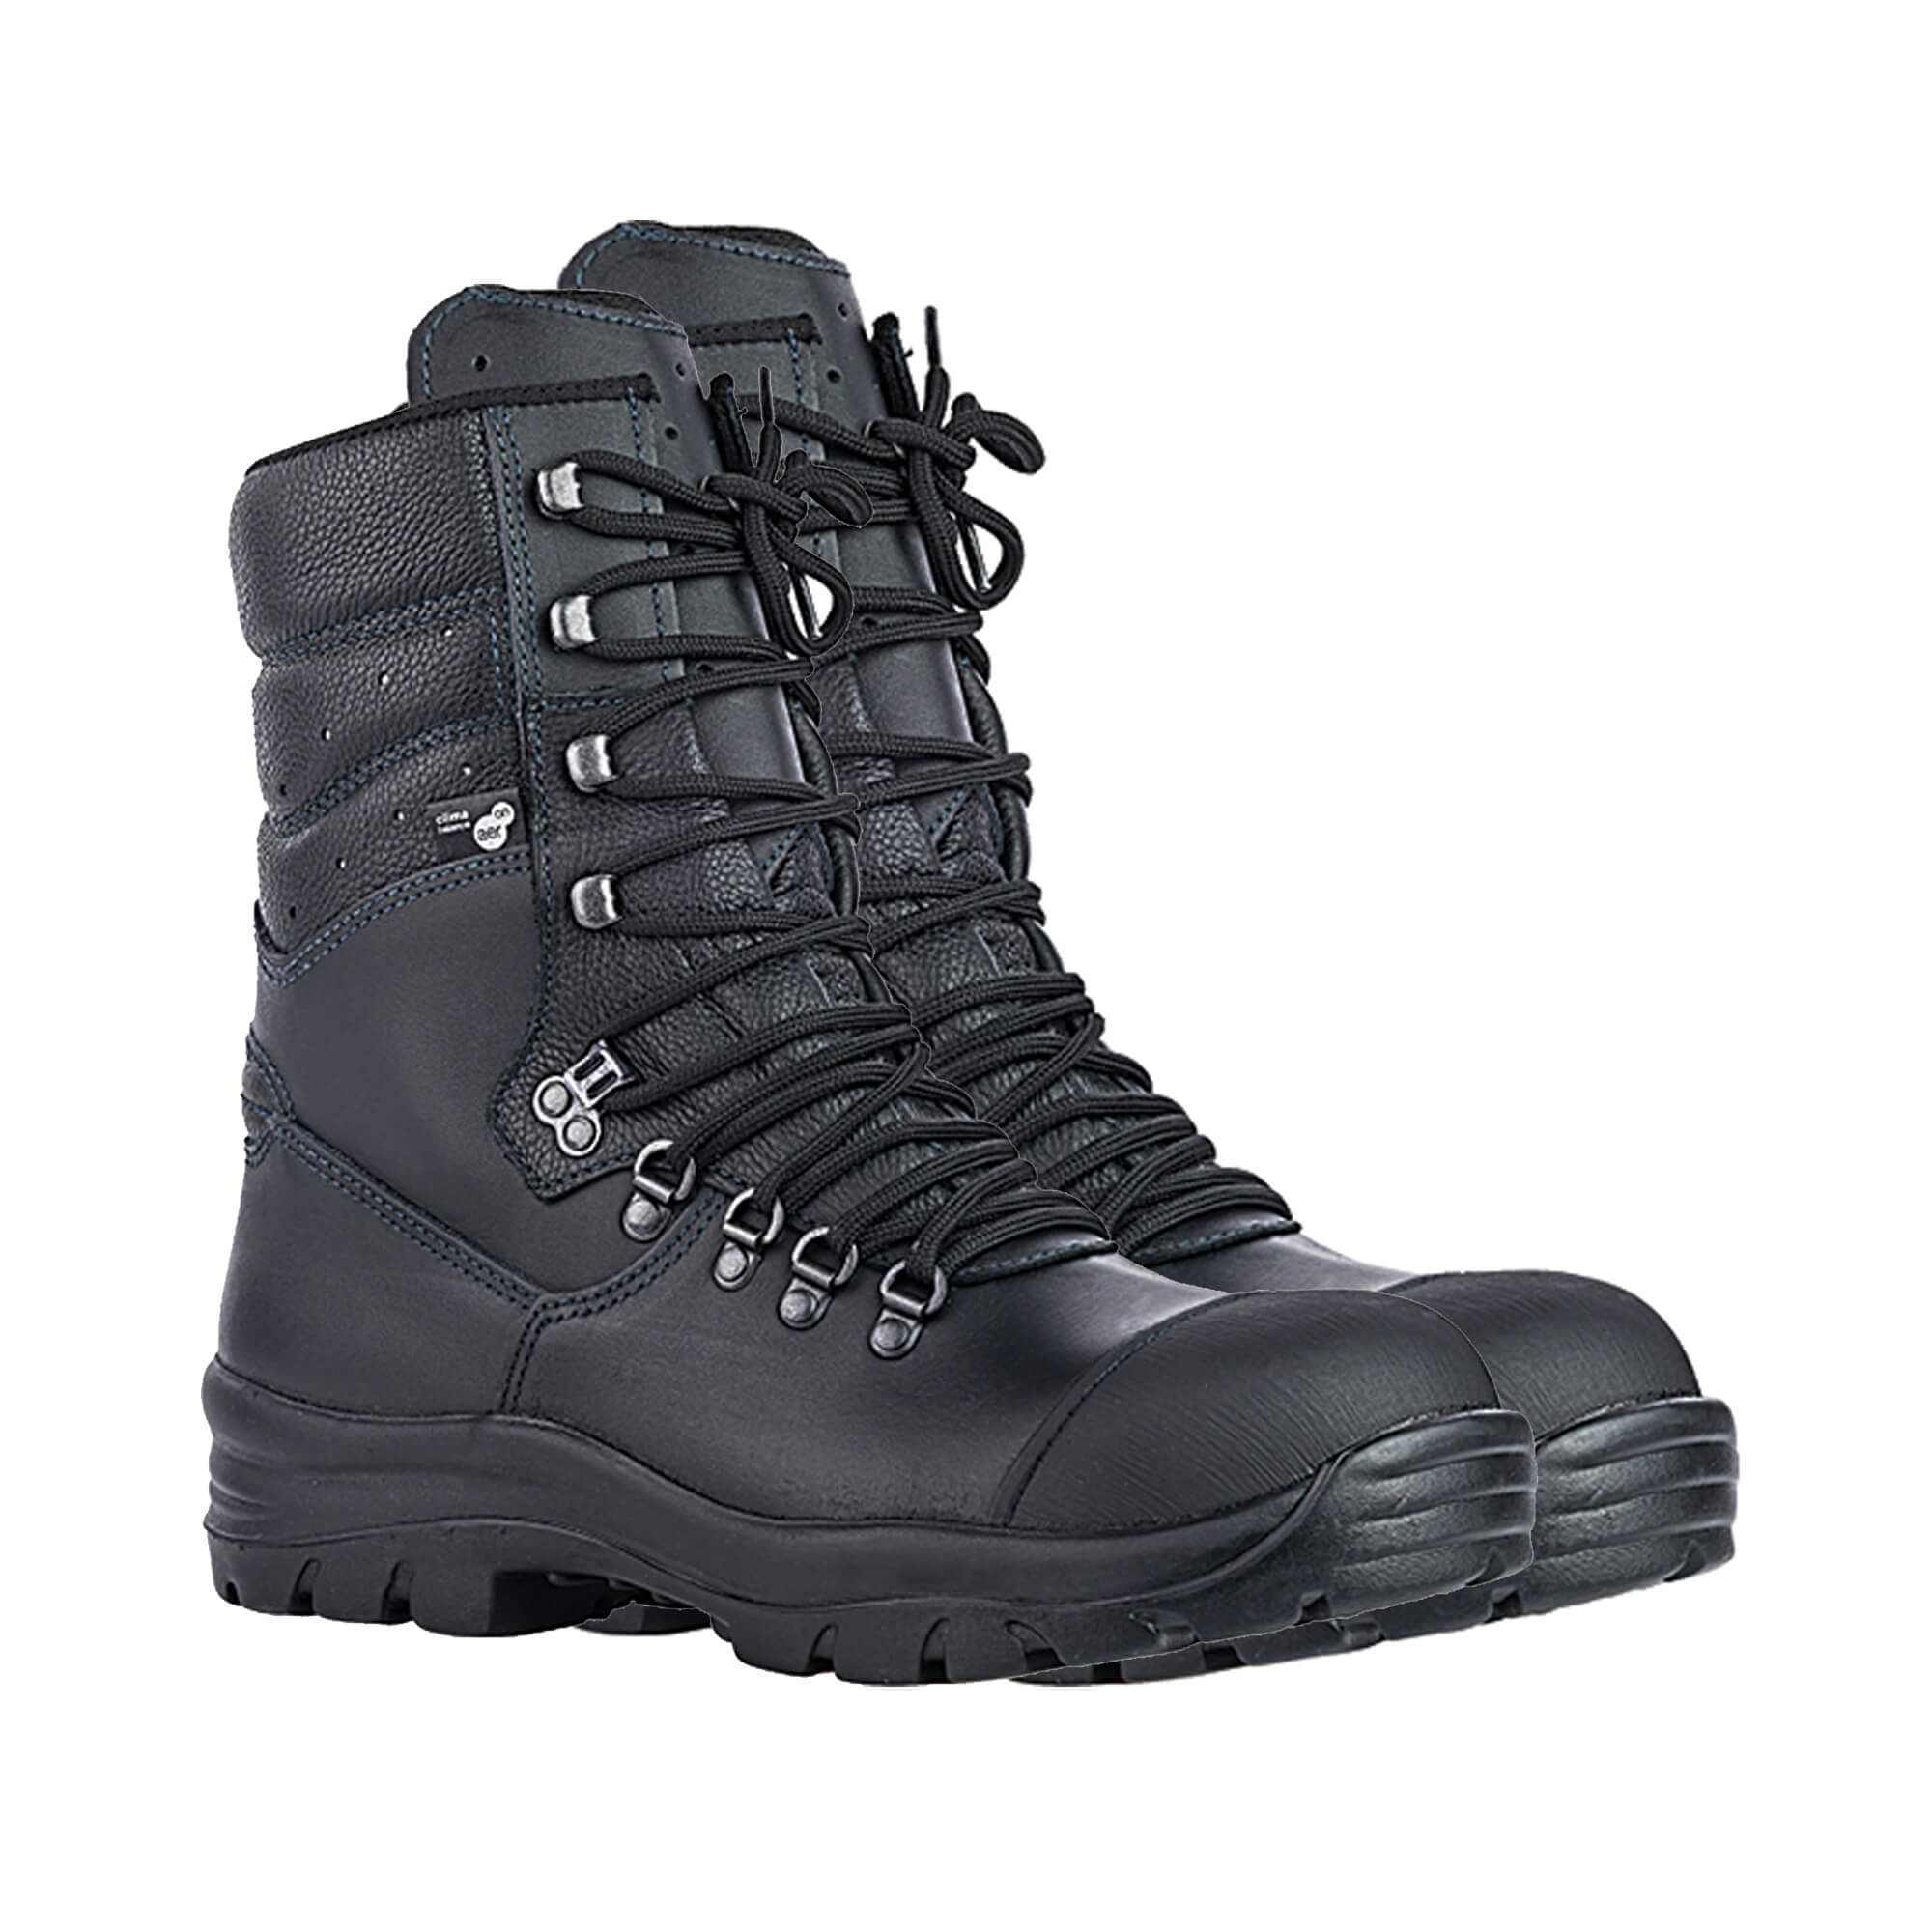 wildland and forest fire boots Dean II